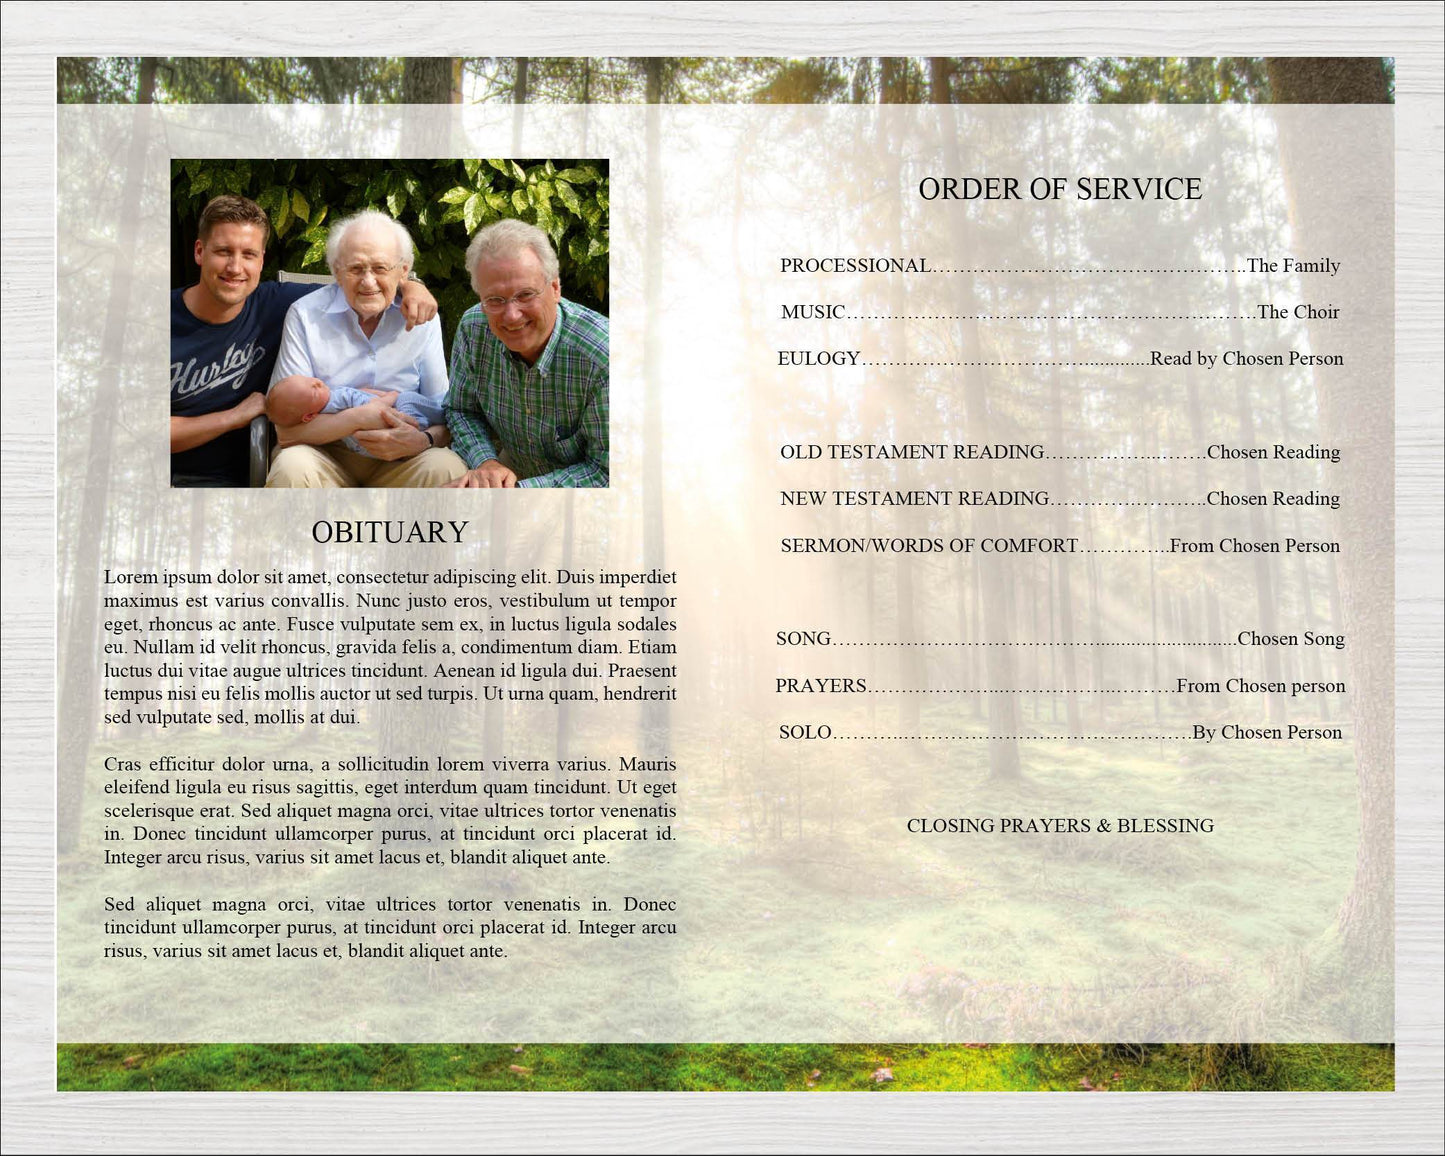 4 Page Forest Funeral Program Template + Prayer Card